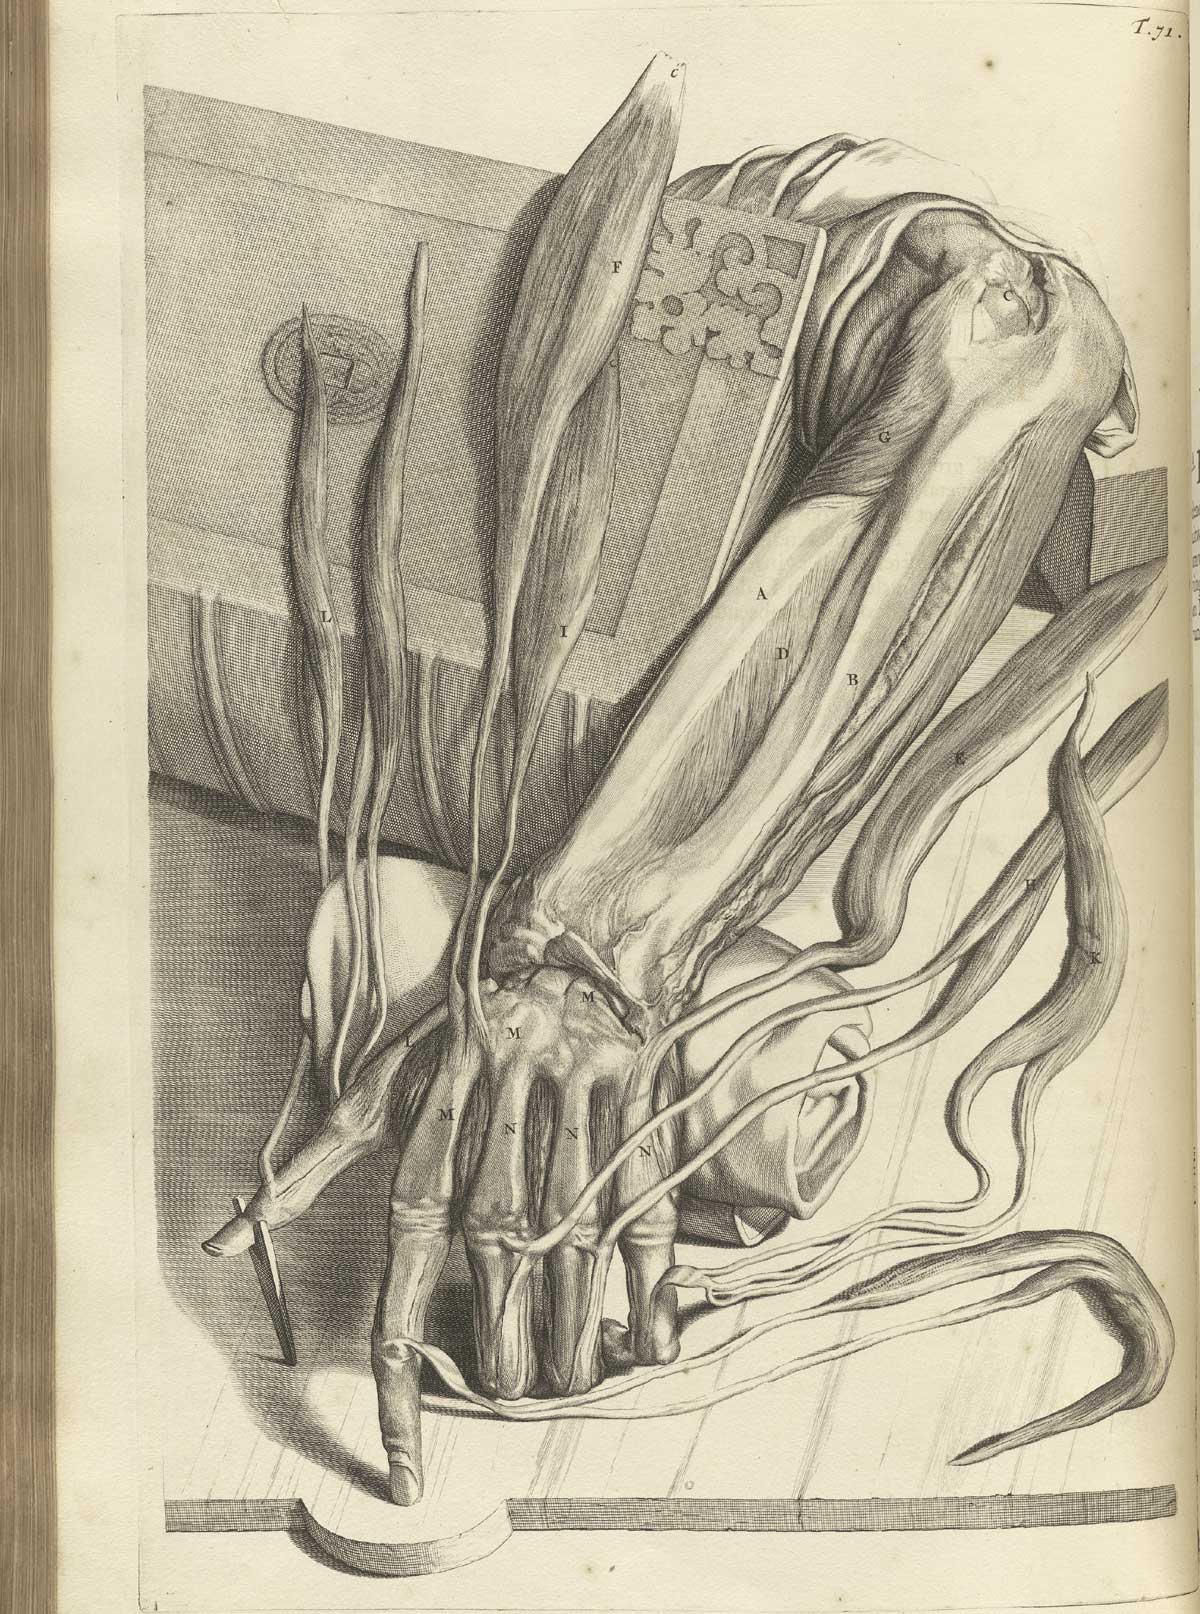 Engraving of a dissected hand with muscles and sinews of the back of the forearm and hand separated with dissecting tools for a detailed view; the forearm and had are laying in a downward direction and pinned to a wooden board; from Govard Bidloo’s Ontleding Des Menschelyken Lichaams, Amsterdam, 1690, NLM Call no. WZ 250 B5855anDu 1690.